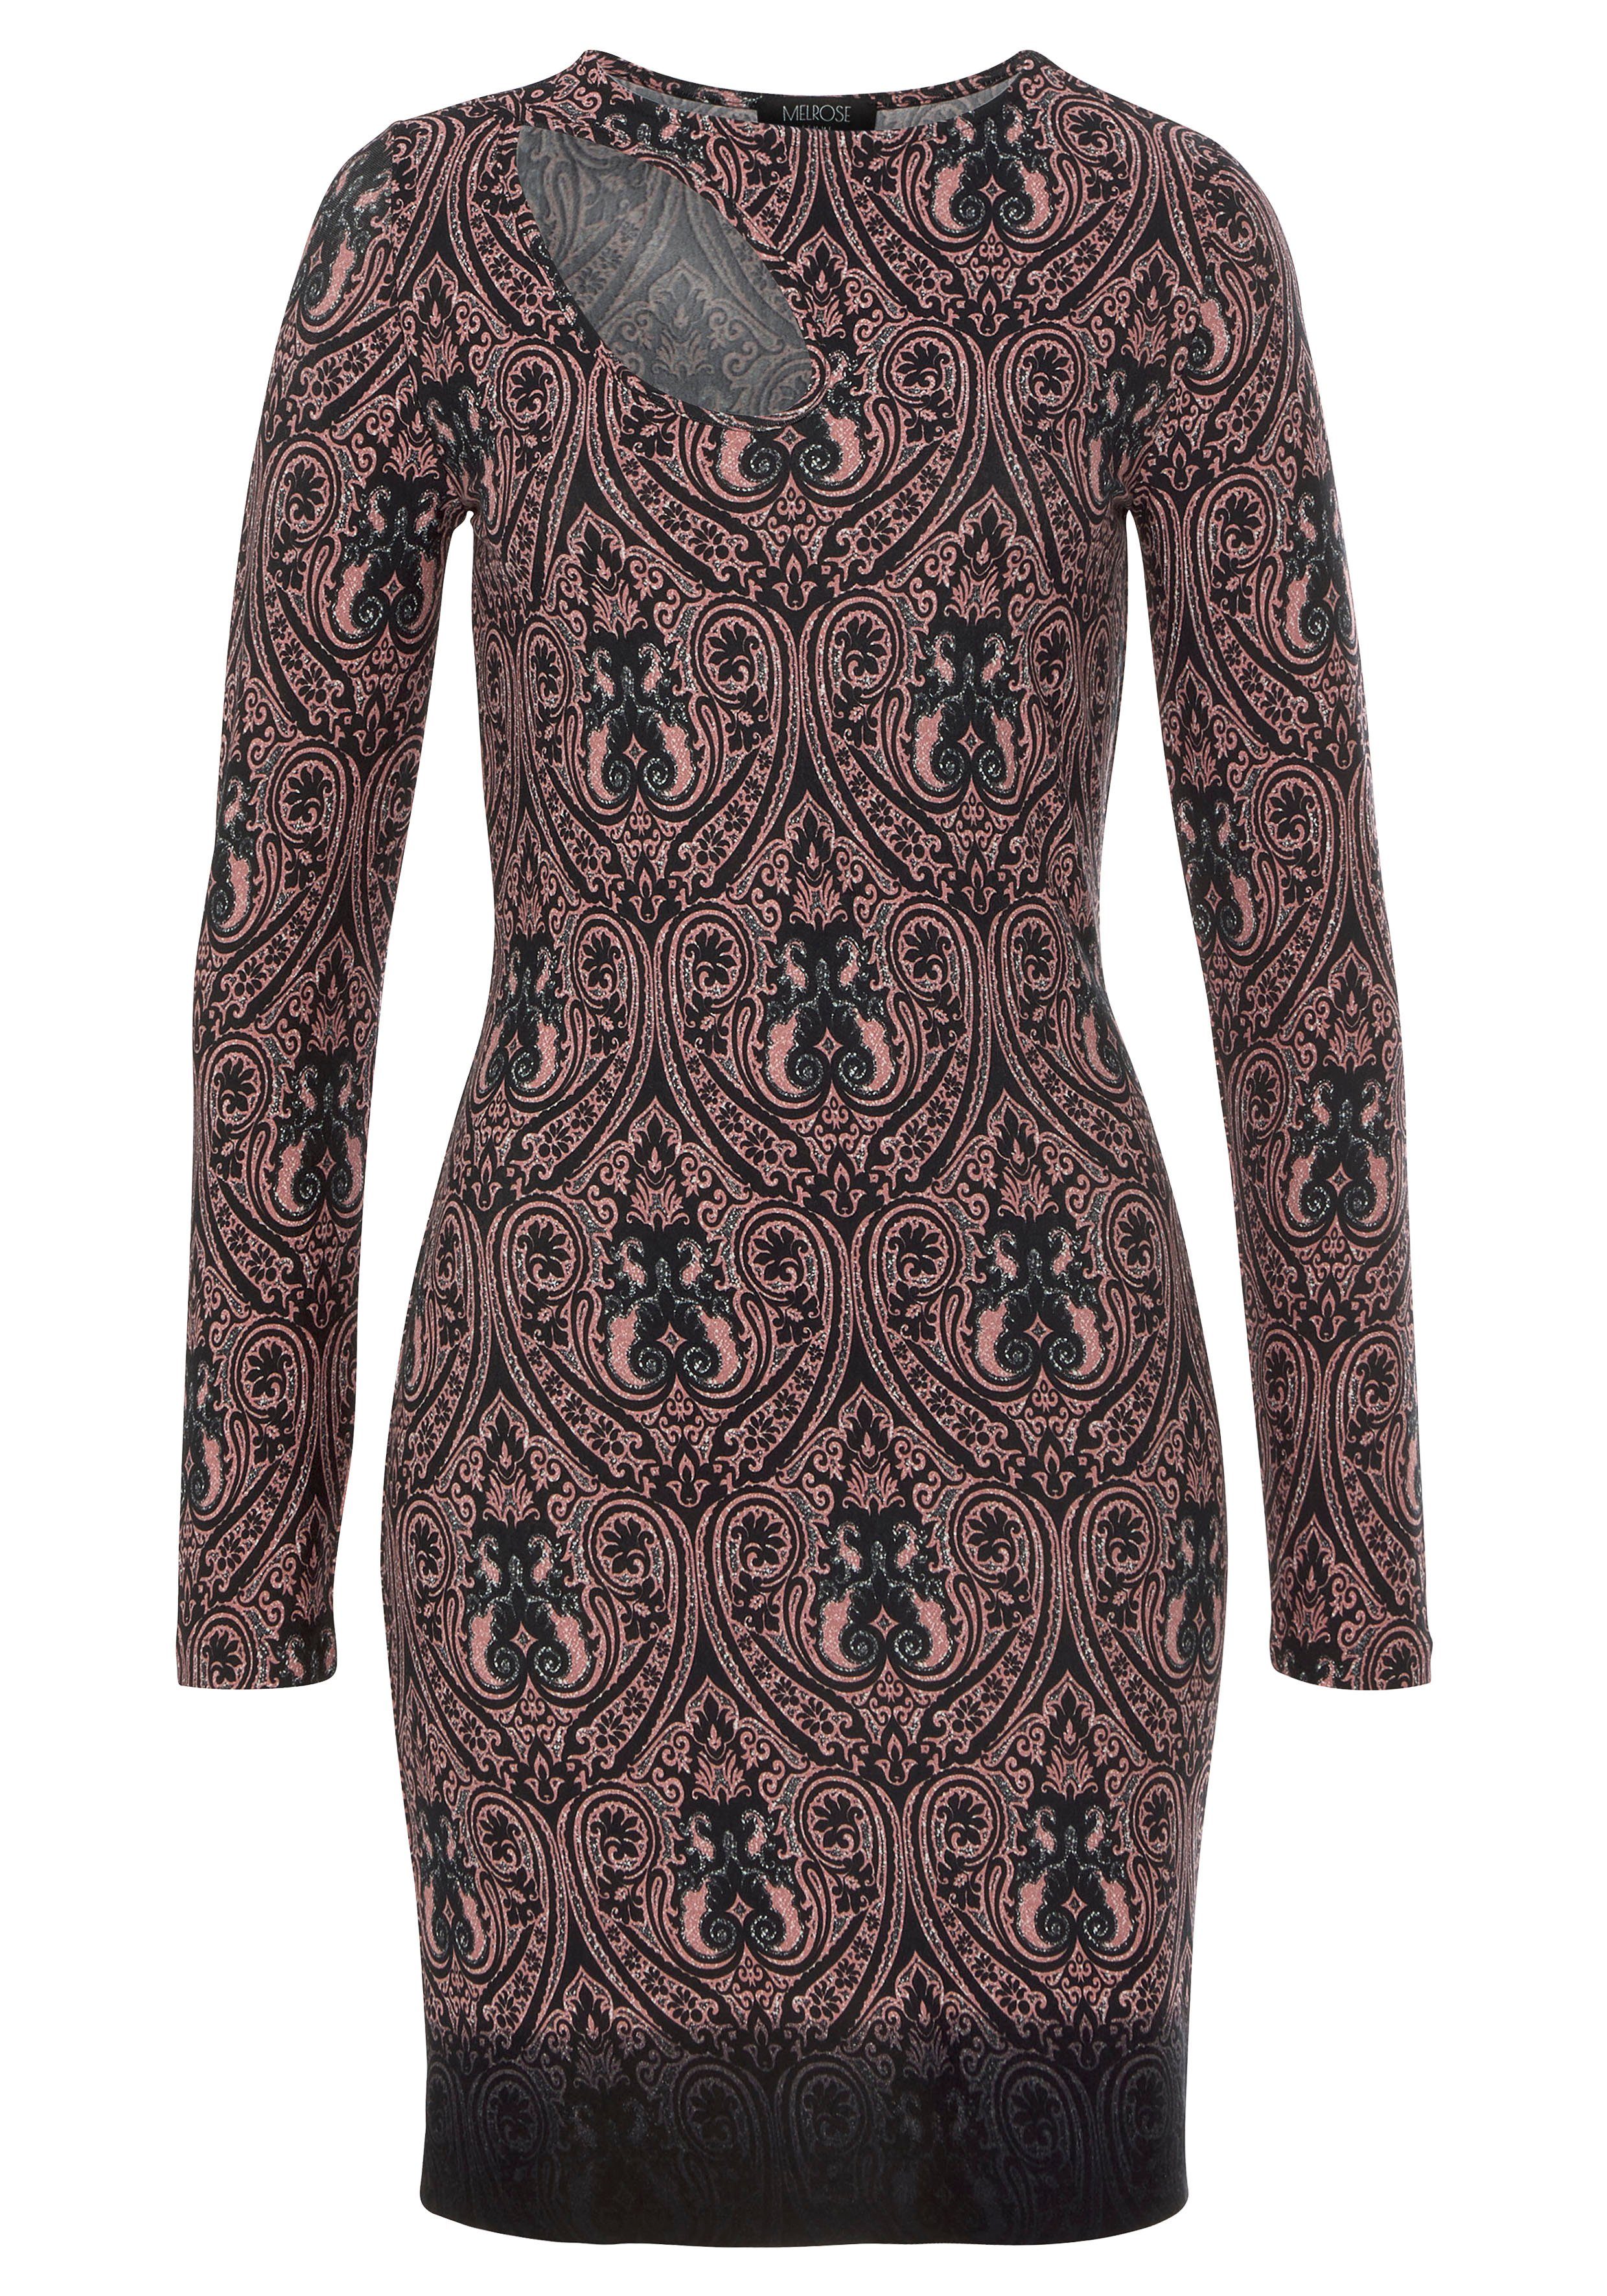 Melrose Jerseykleid Paisley-Muster Cut-Out mit und